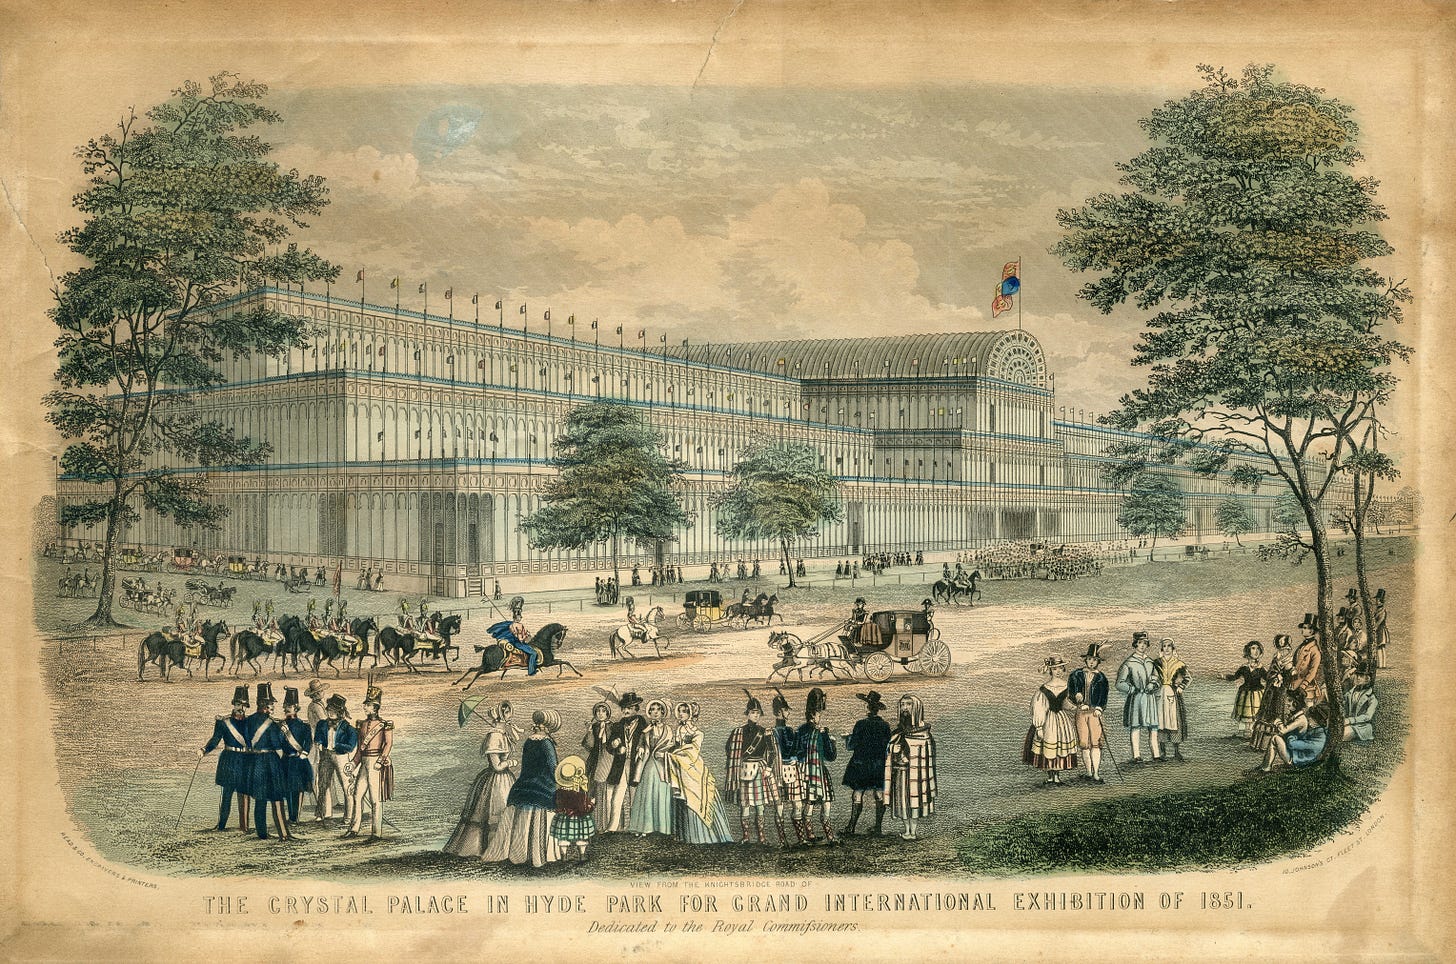 Enormous iron and glass greenhouse with Victorian people and horses outside